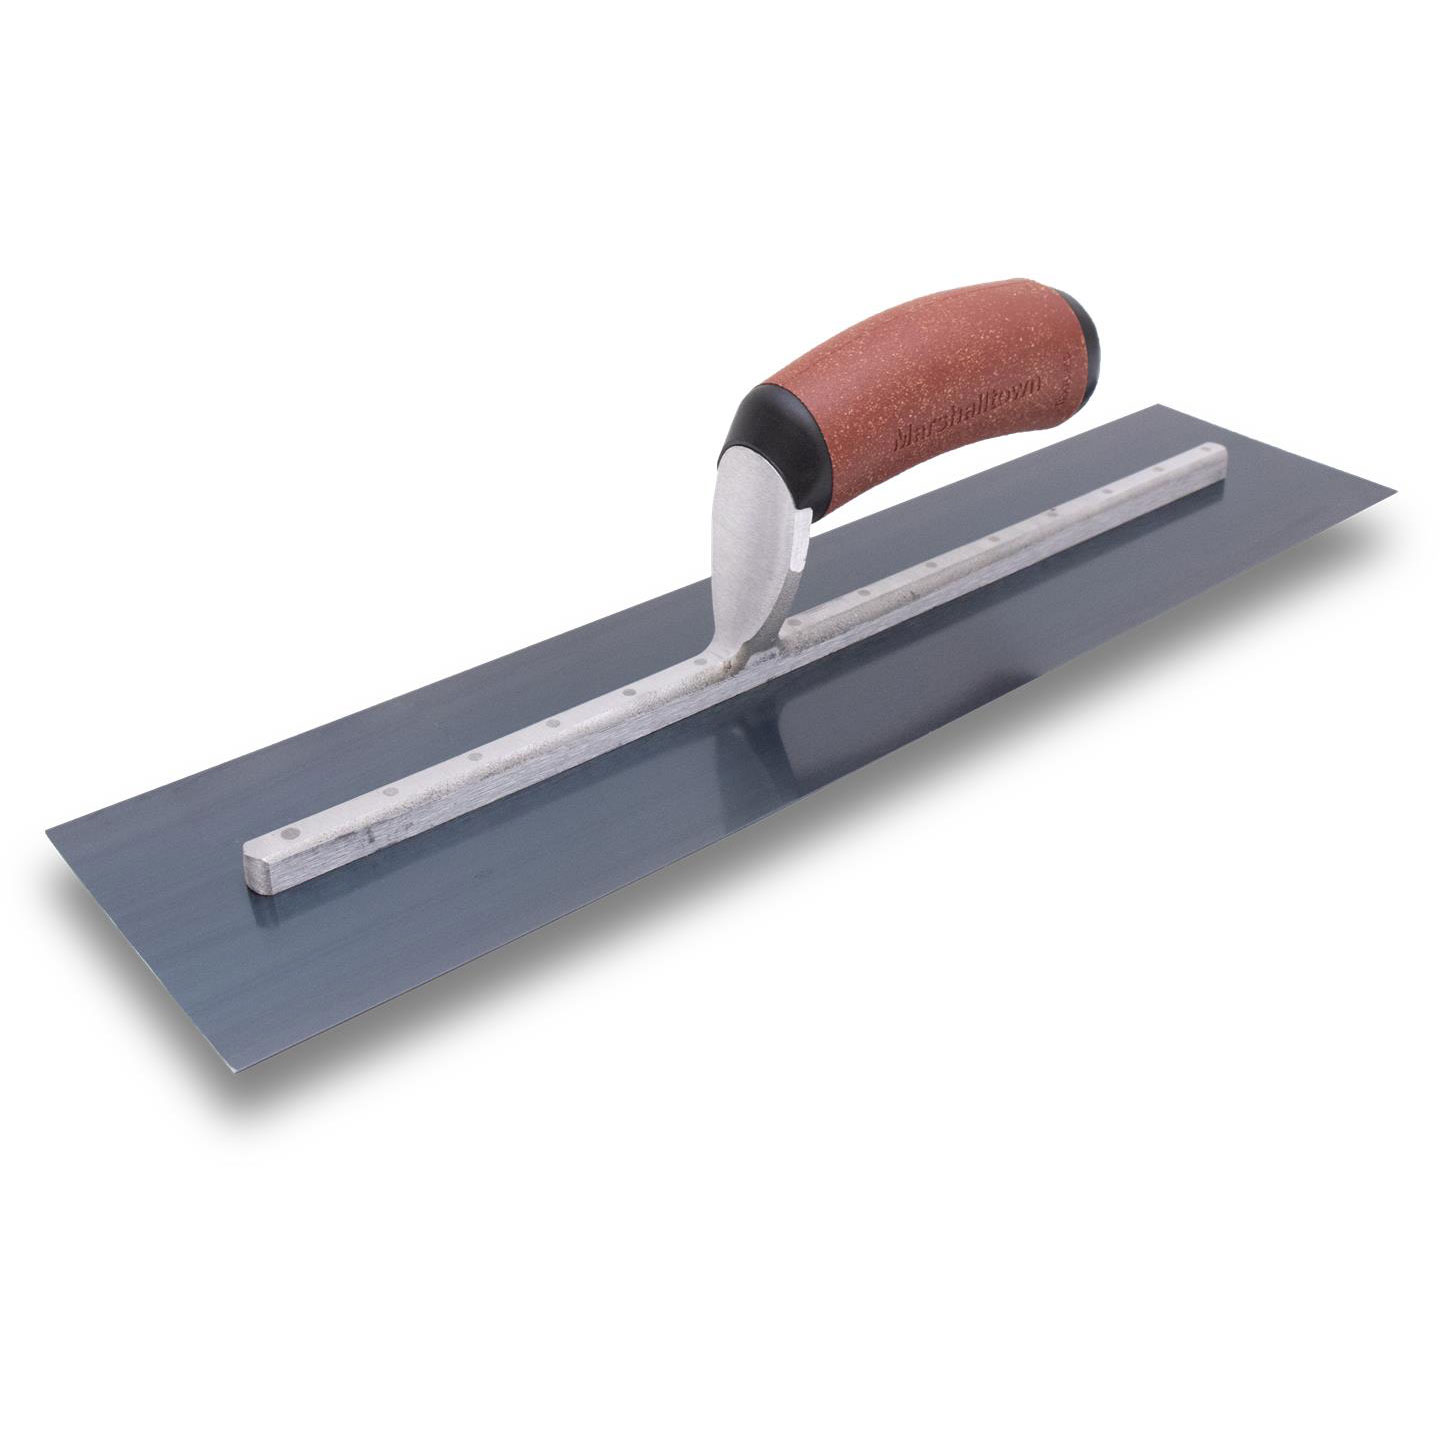 Marshalltown MXS56BDC 12in x 3in Blue Steel Finishing Trowel with DuraCork Handle MXS56BDC